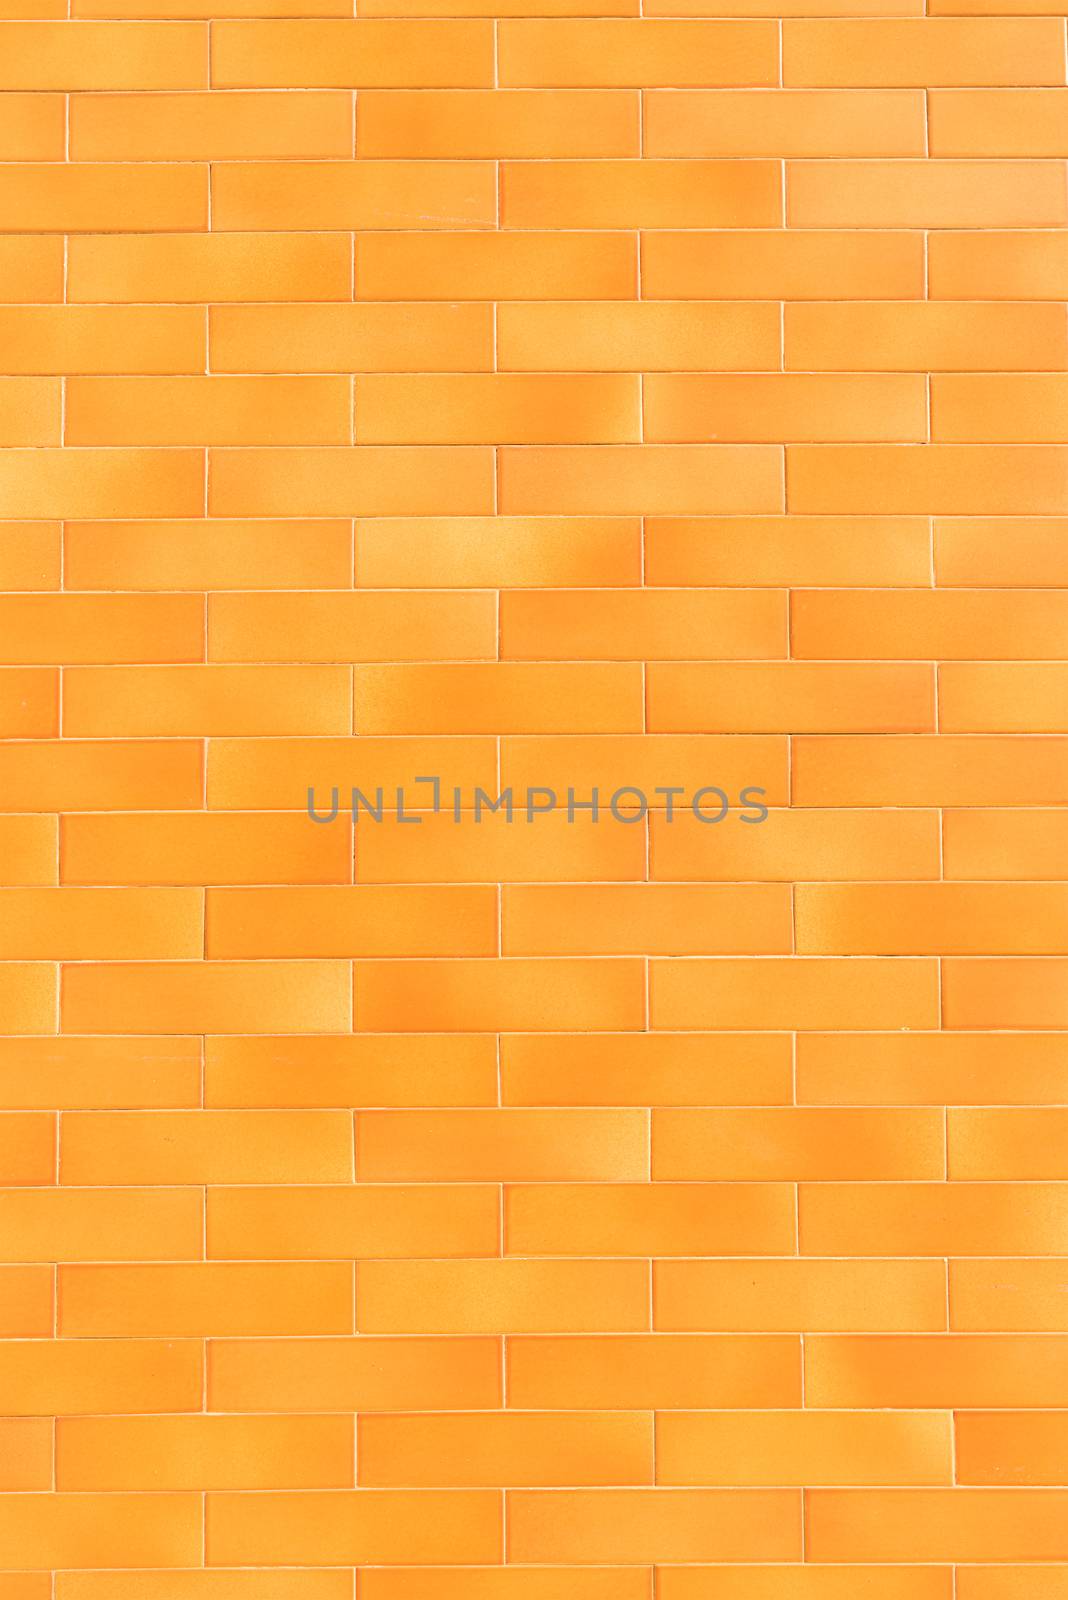 An orange tiled background with relatively small tiles